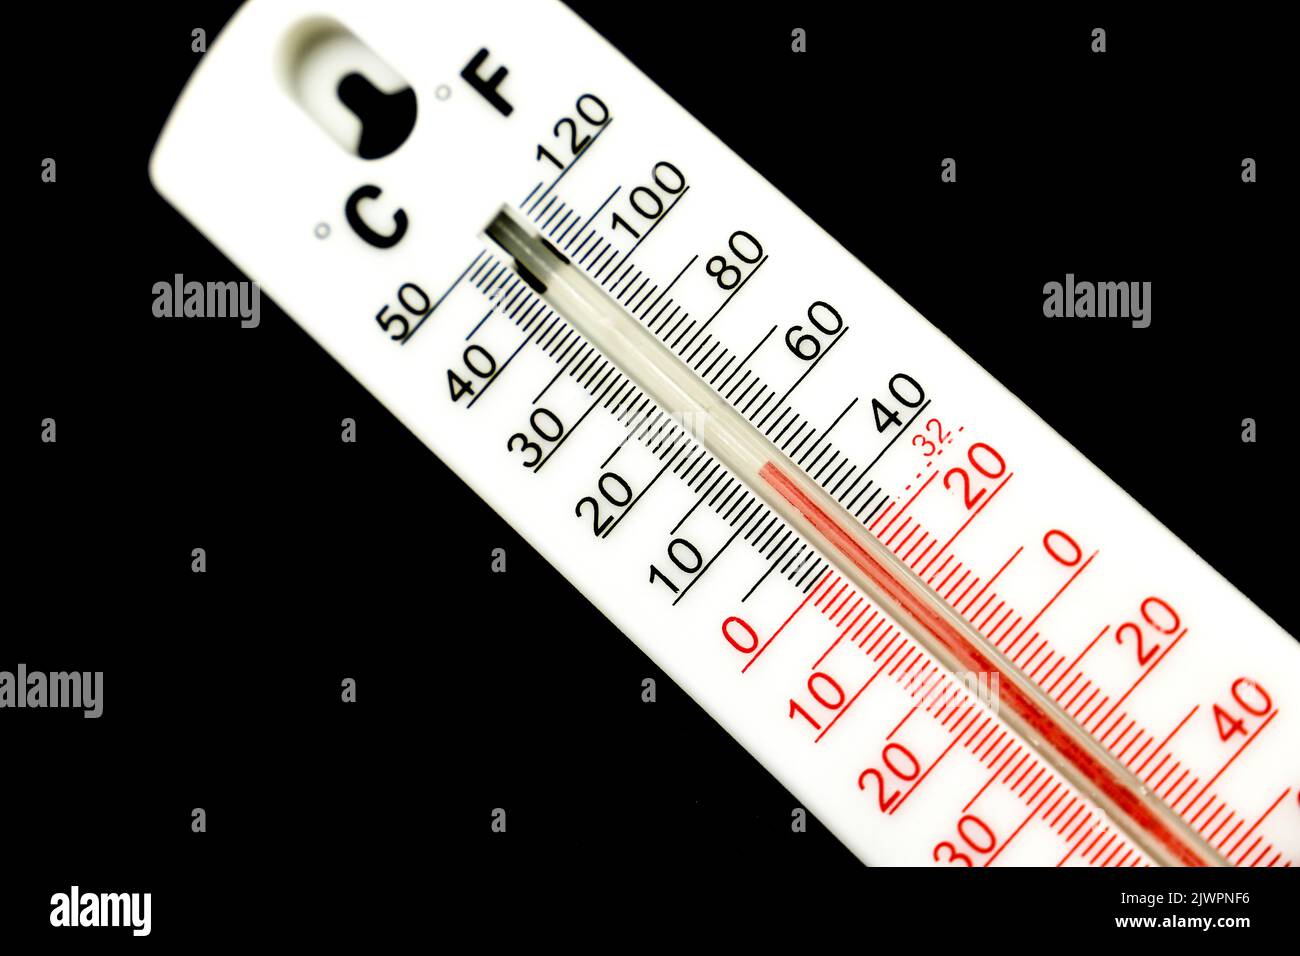 15 Celsius and almost 50 Fahrenheit degrees on a thermometer on black background Stock Photo